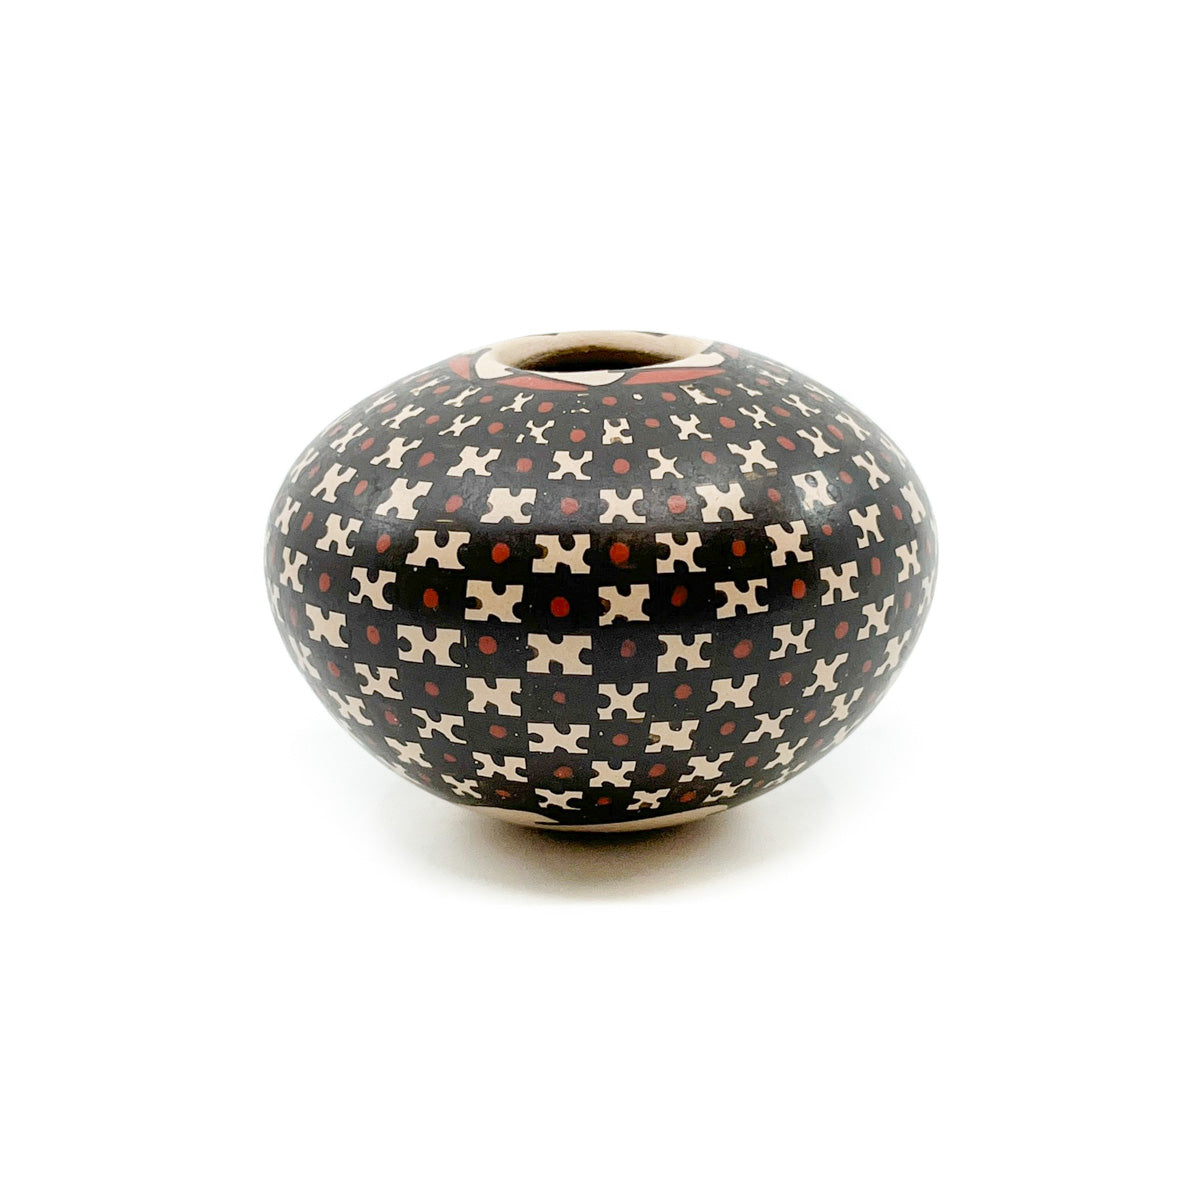 Mini Seed Pot with Black & Red Geometrics with Whirling Design Opening